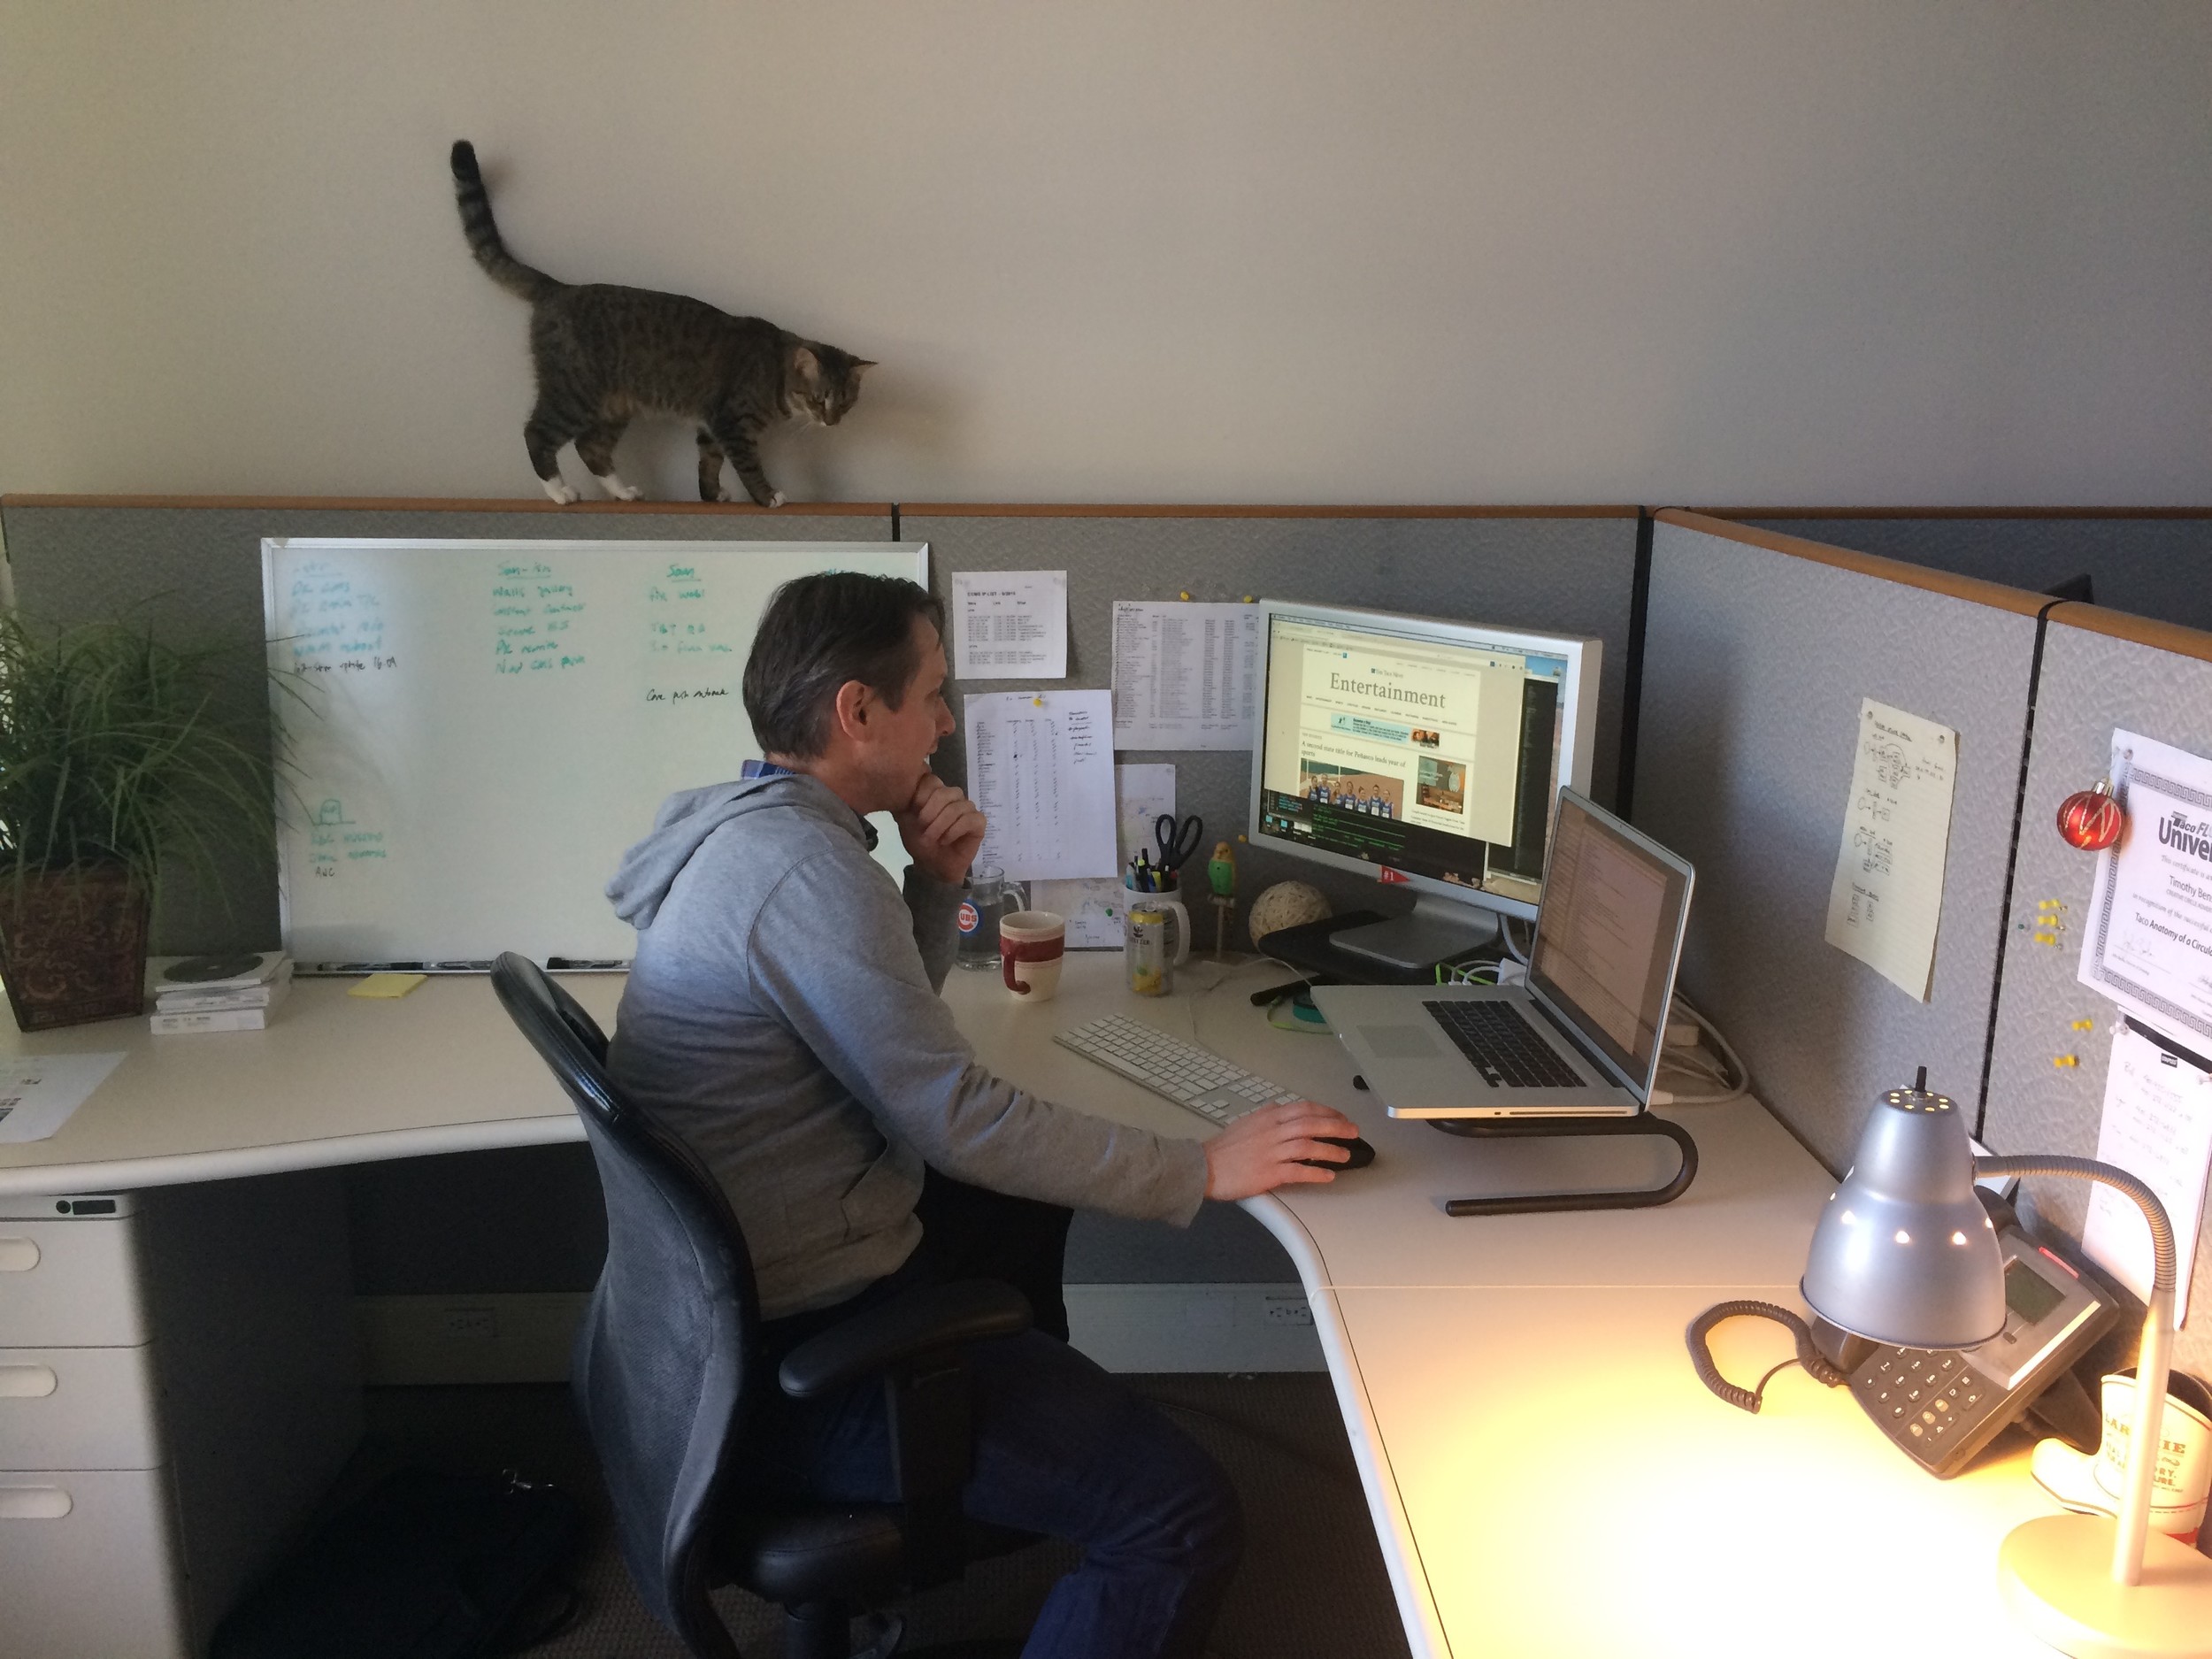 Tim Benson, our lead programmer, works on building out a new site while Charlotte strolls by above.